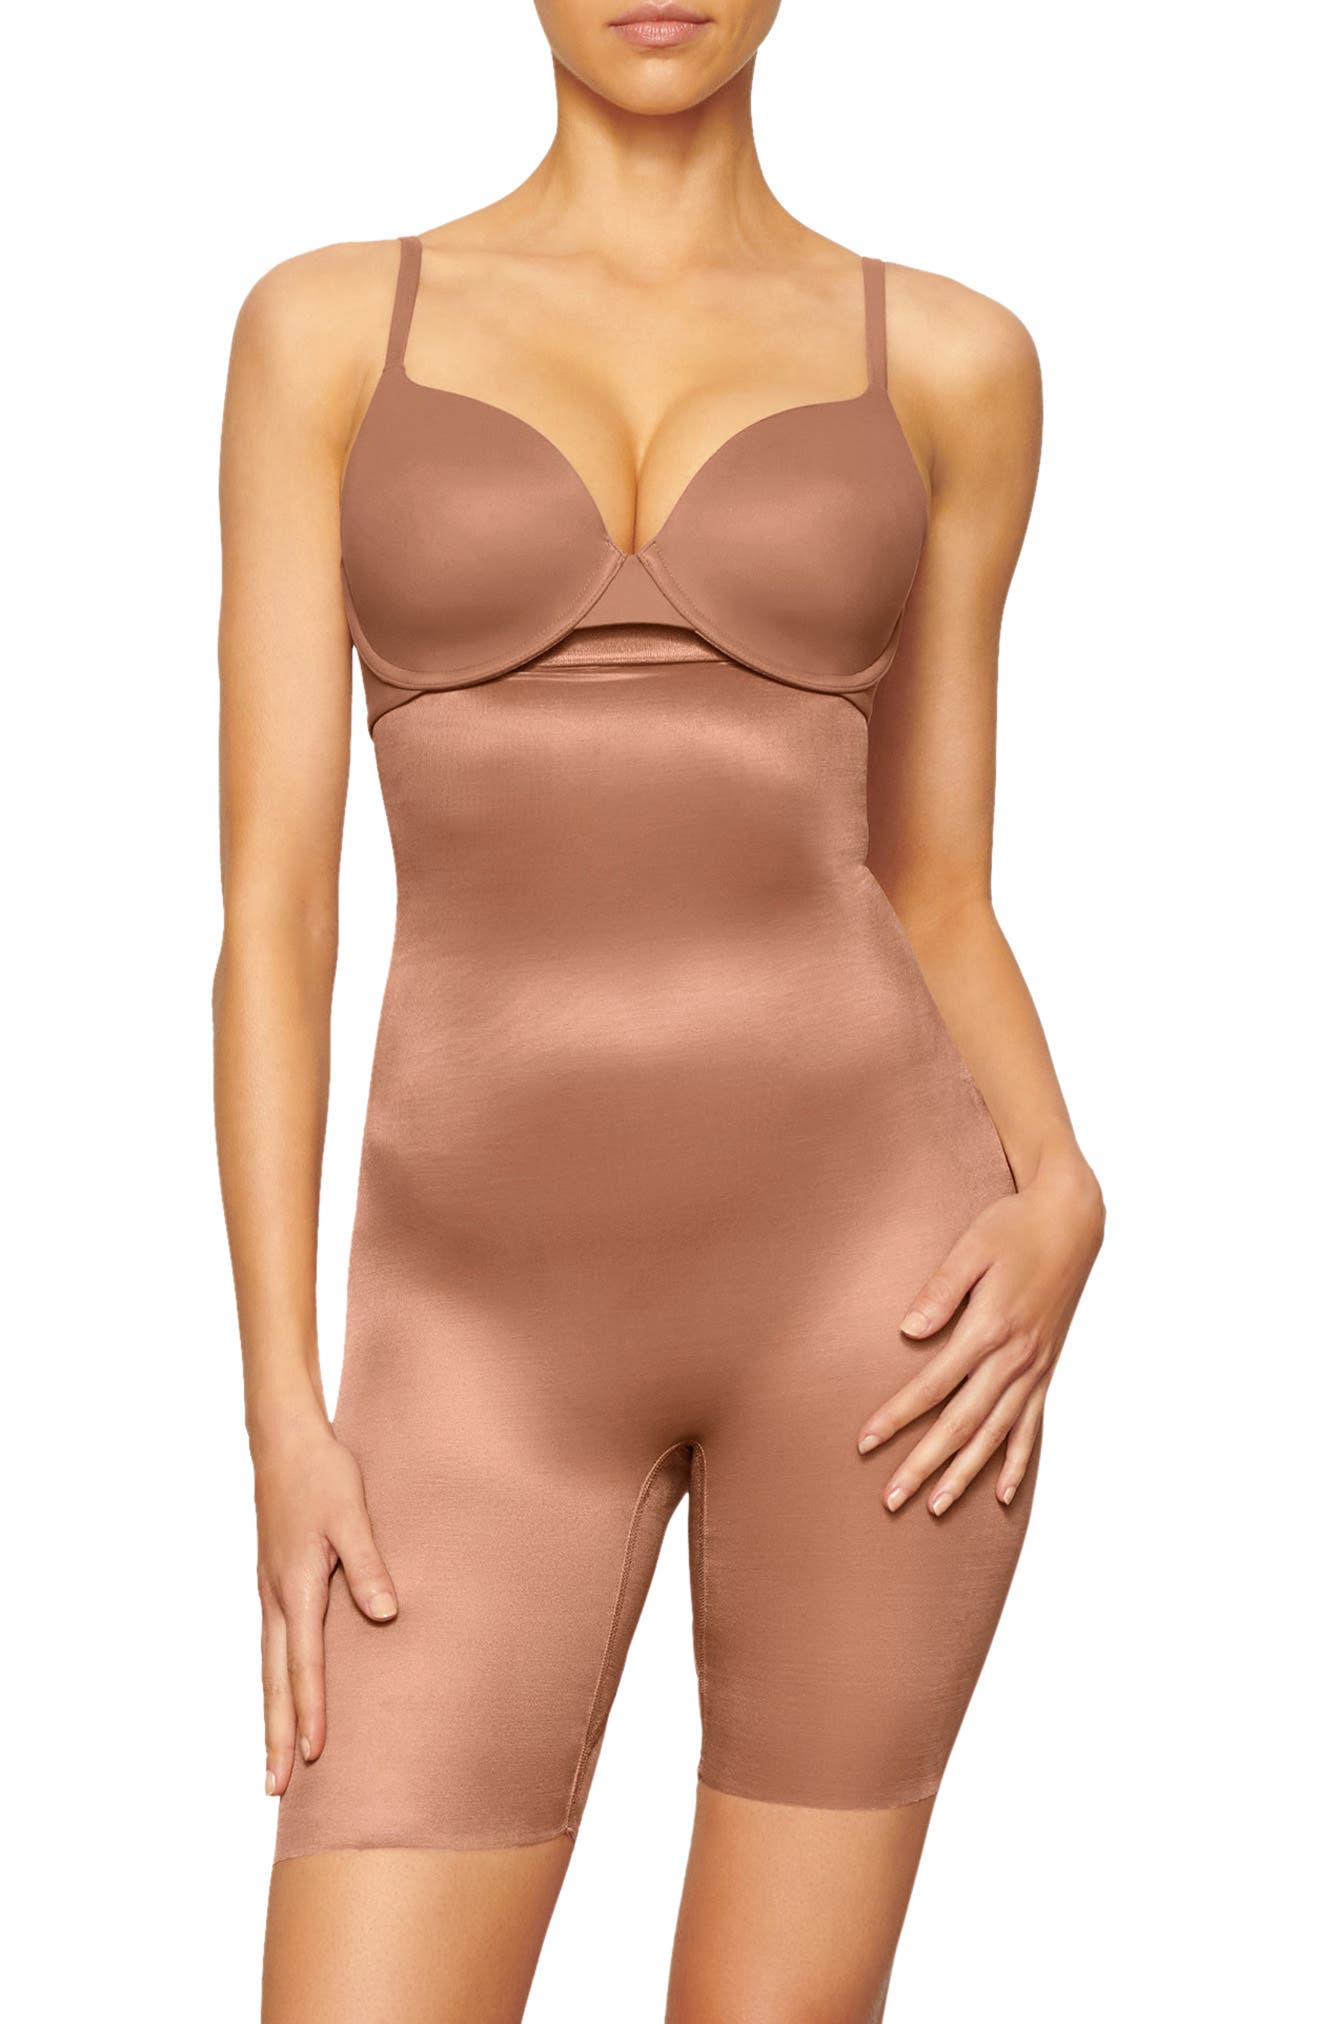 Nordstrom Women Clothing Underwear Shapewear Barely There Shapewear Mid Thigh Shorts in Bronze at Nordstrom 